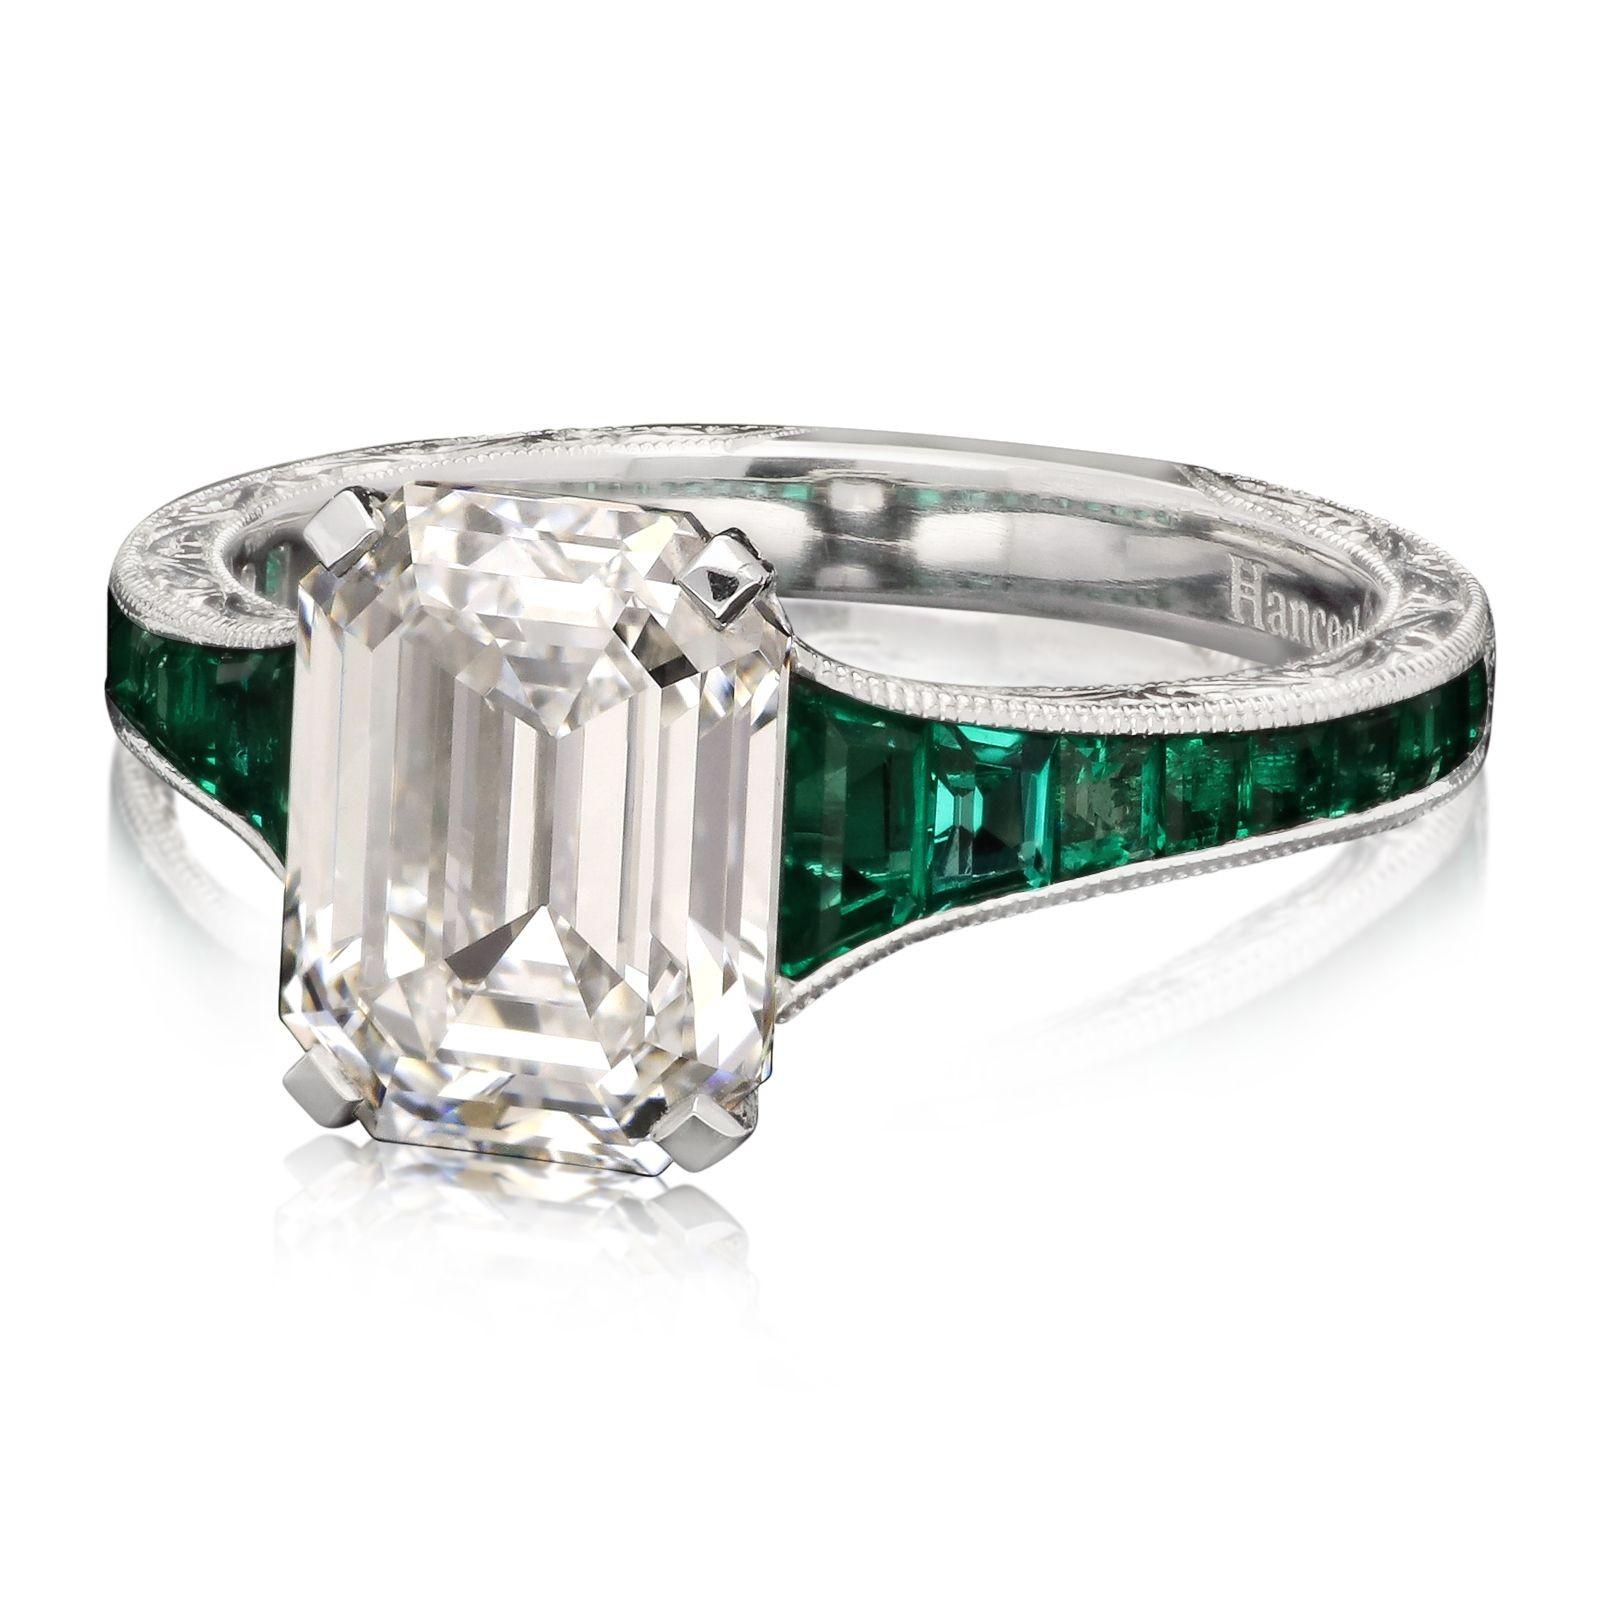 A beautiful diamond and emerald ring by Hancocks set to the centre with a stunning emerald-cut diamond weighing 2.85ct and of D colour and VS2 clarity, in a corner claw setting between tapering shoulders set with 0.85cts of rich green calibre-cut